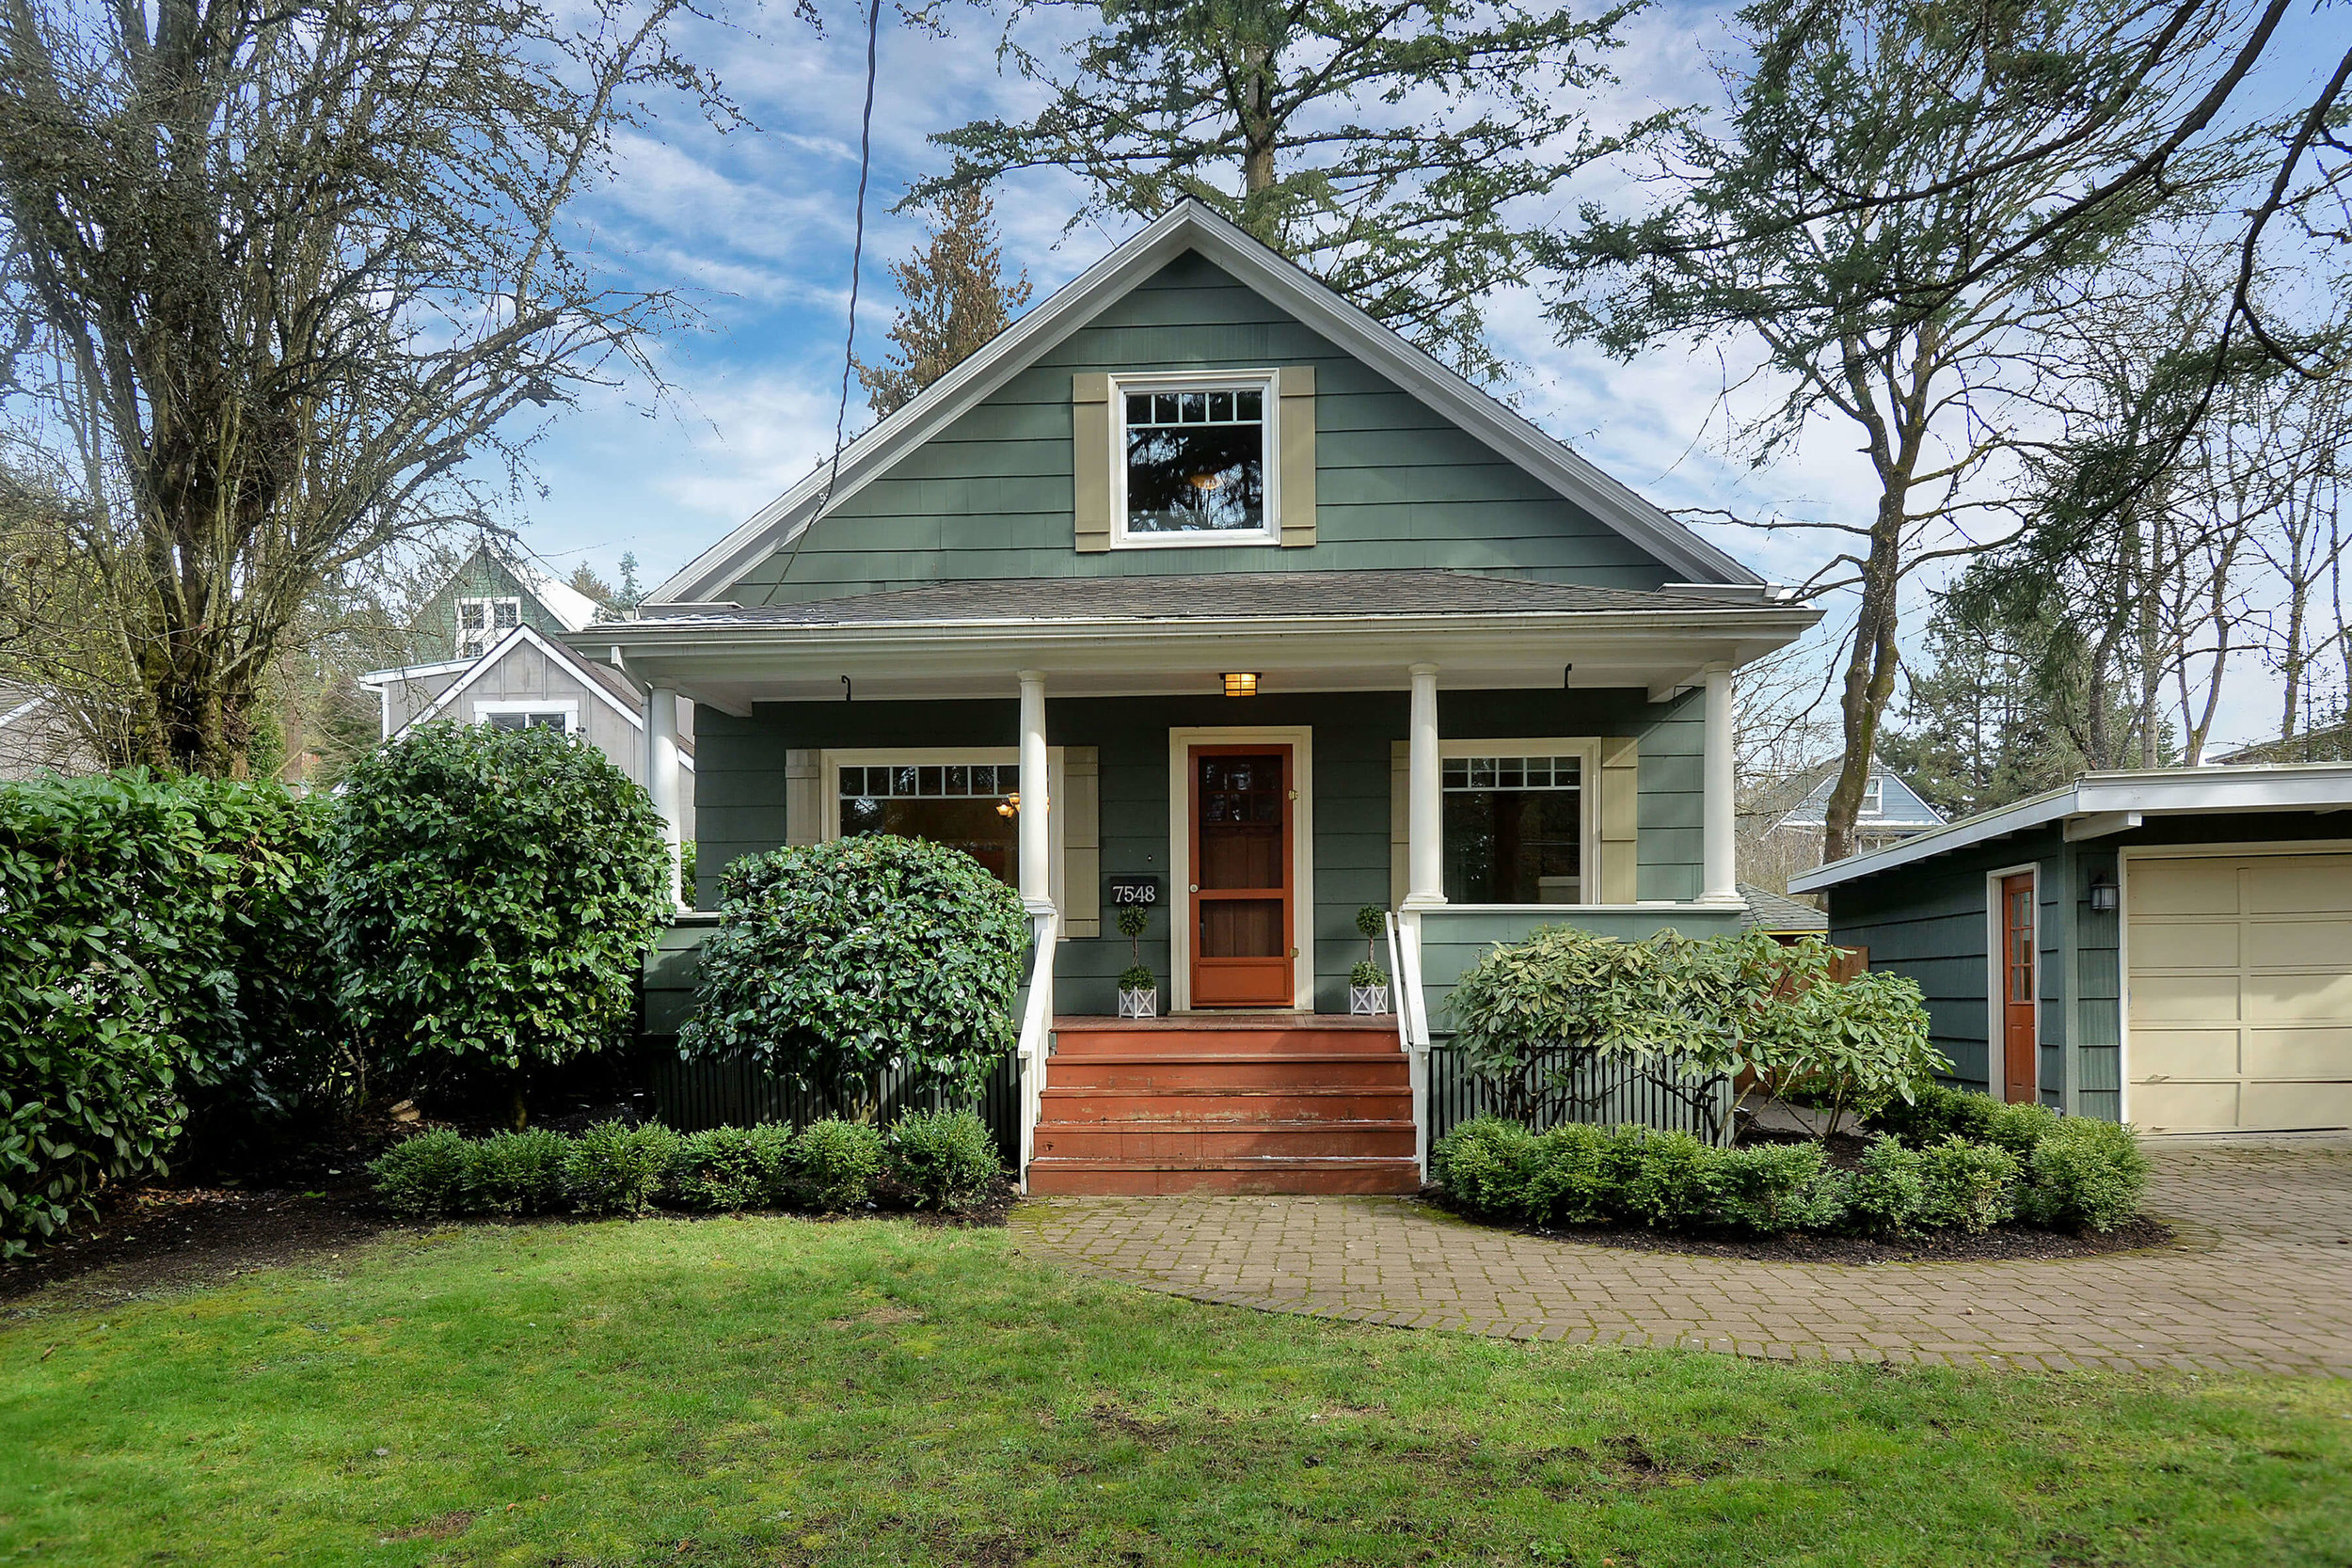 7548 SW 35th Ave. &lt;Strong&gt;SOLD&lt;/Strong&gt;